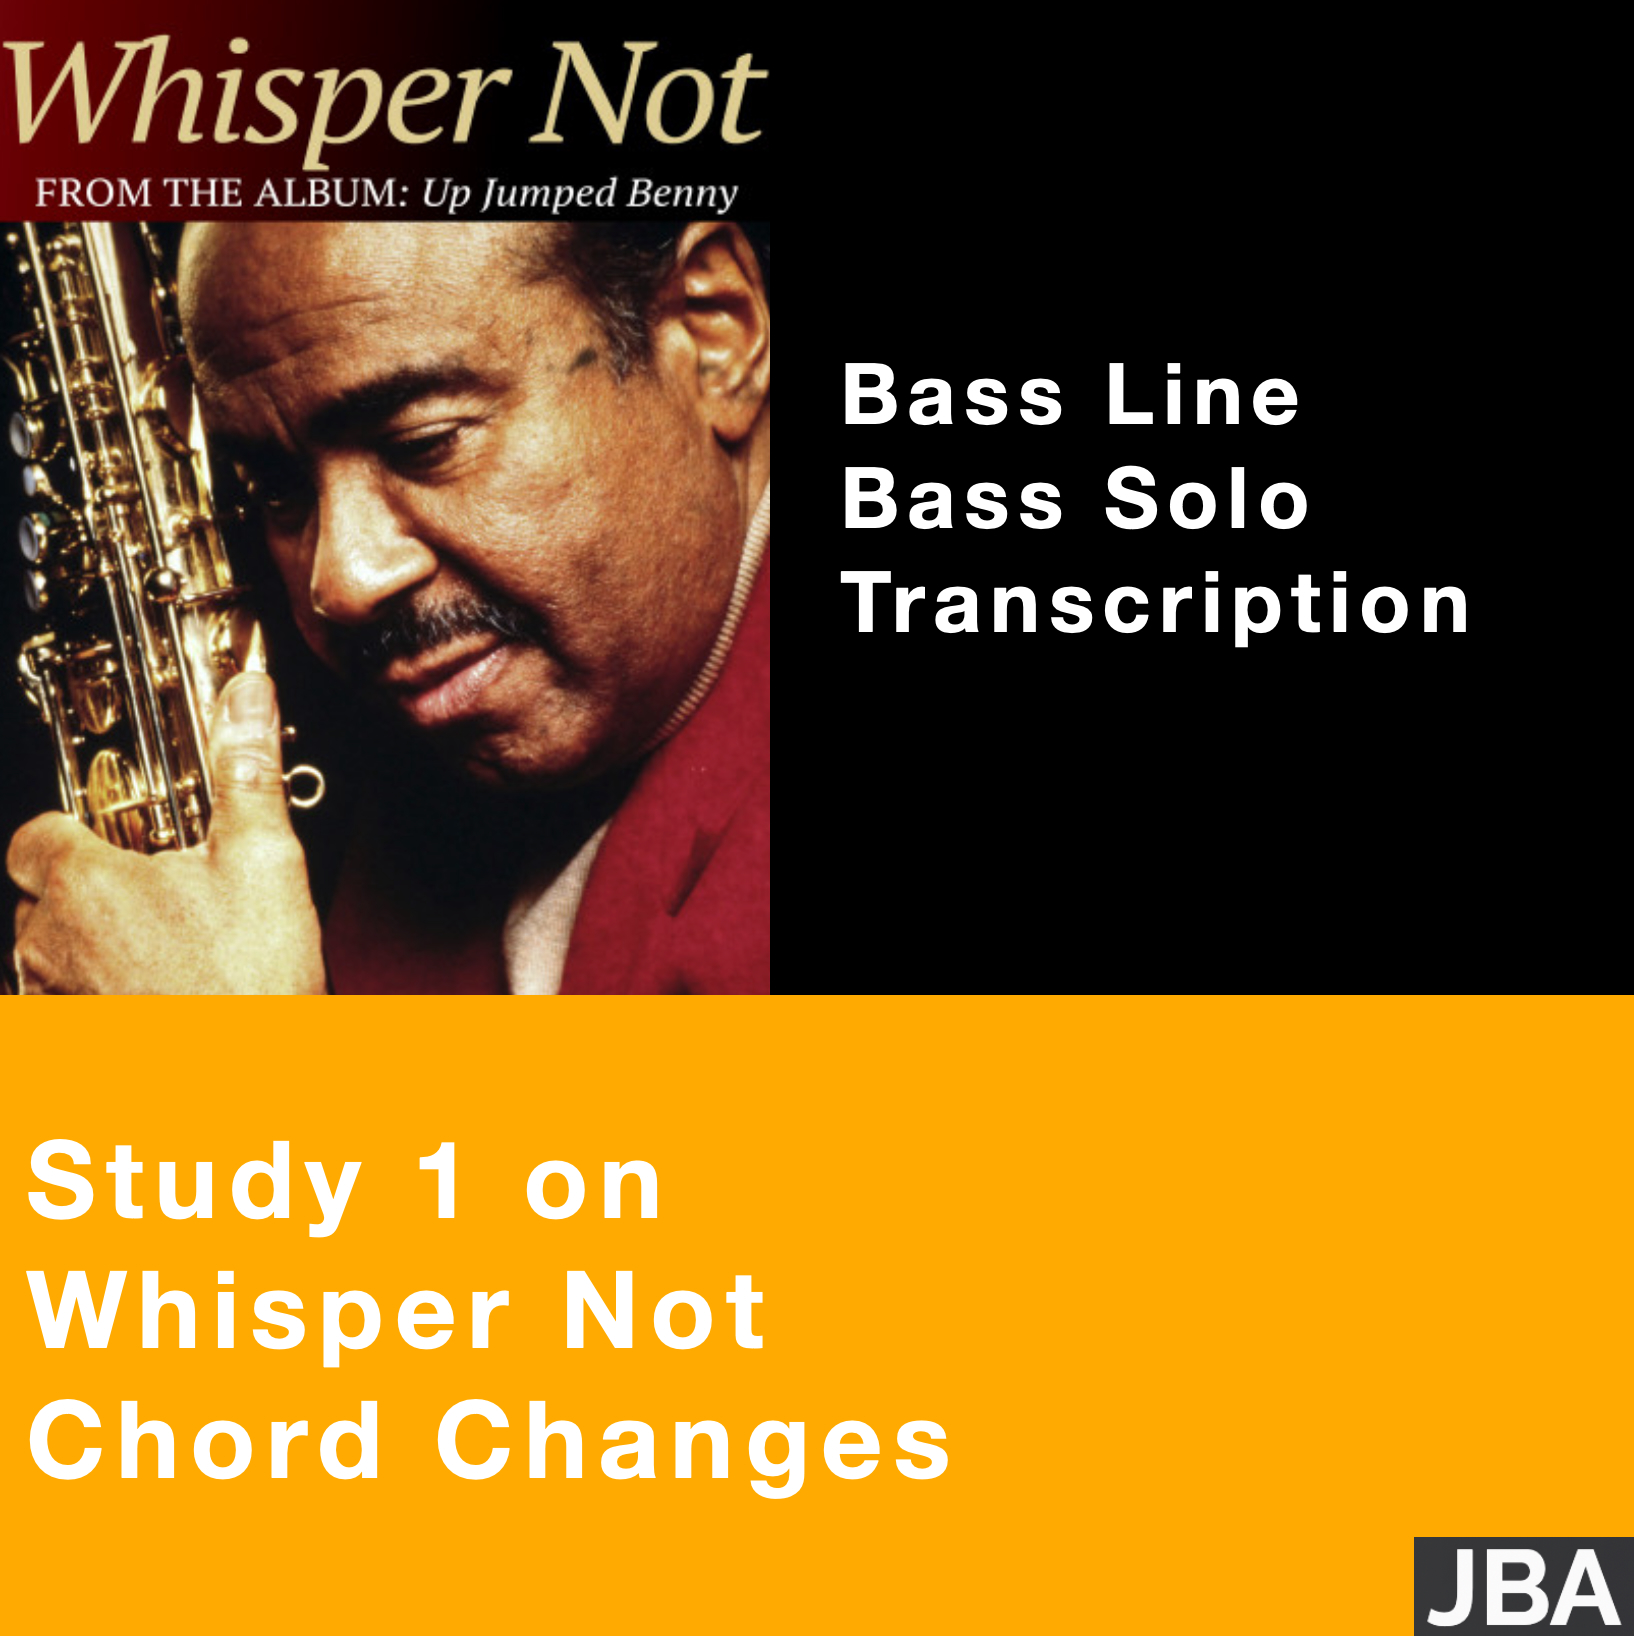 Study 1 on Whisper Not chord changes